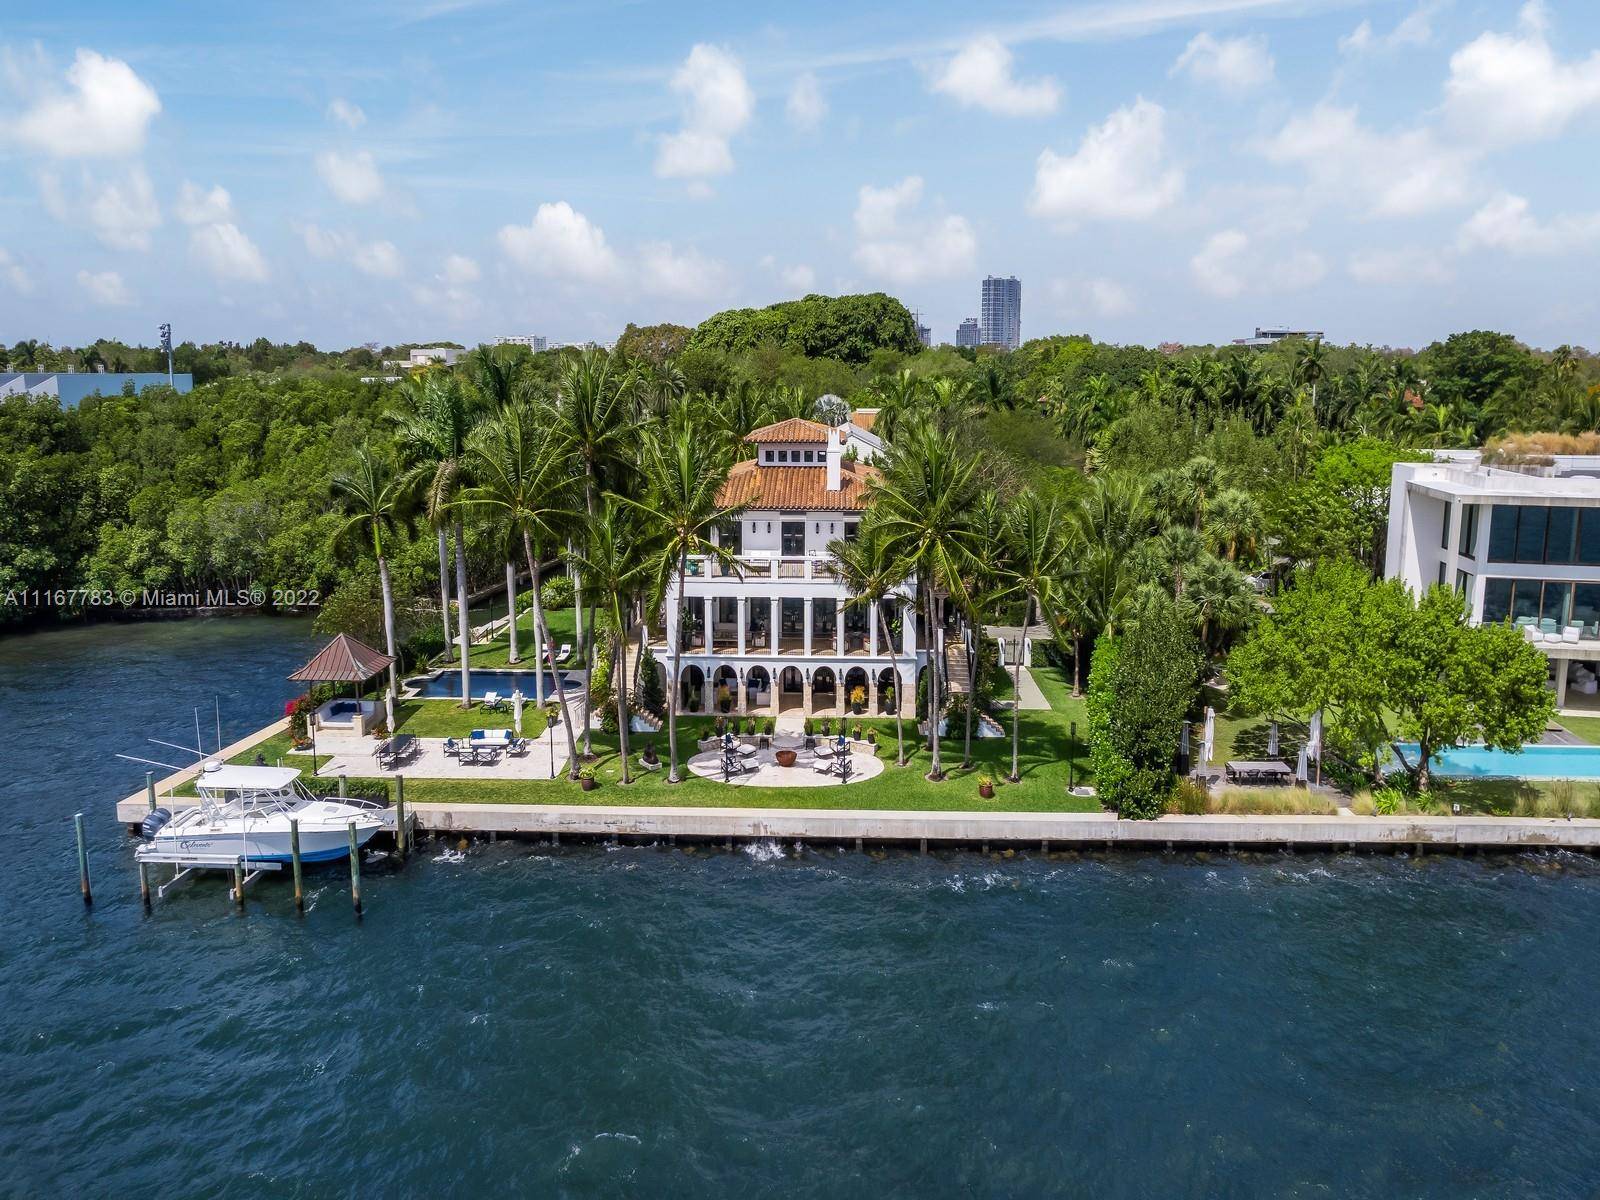 Located in a beautiful woodsy private enclave where only 26 homes enjoy its exclusivity, Camp Biscayne is one of Miami s best kept secrets in the heart of Coconut Grove.